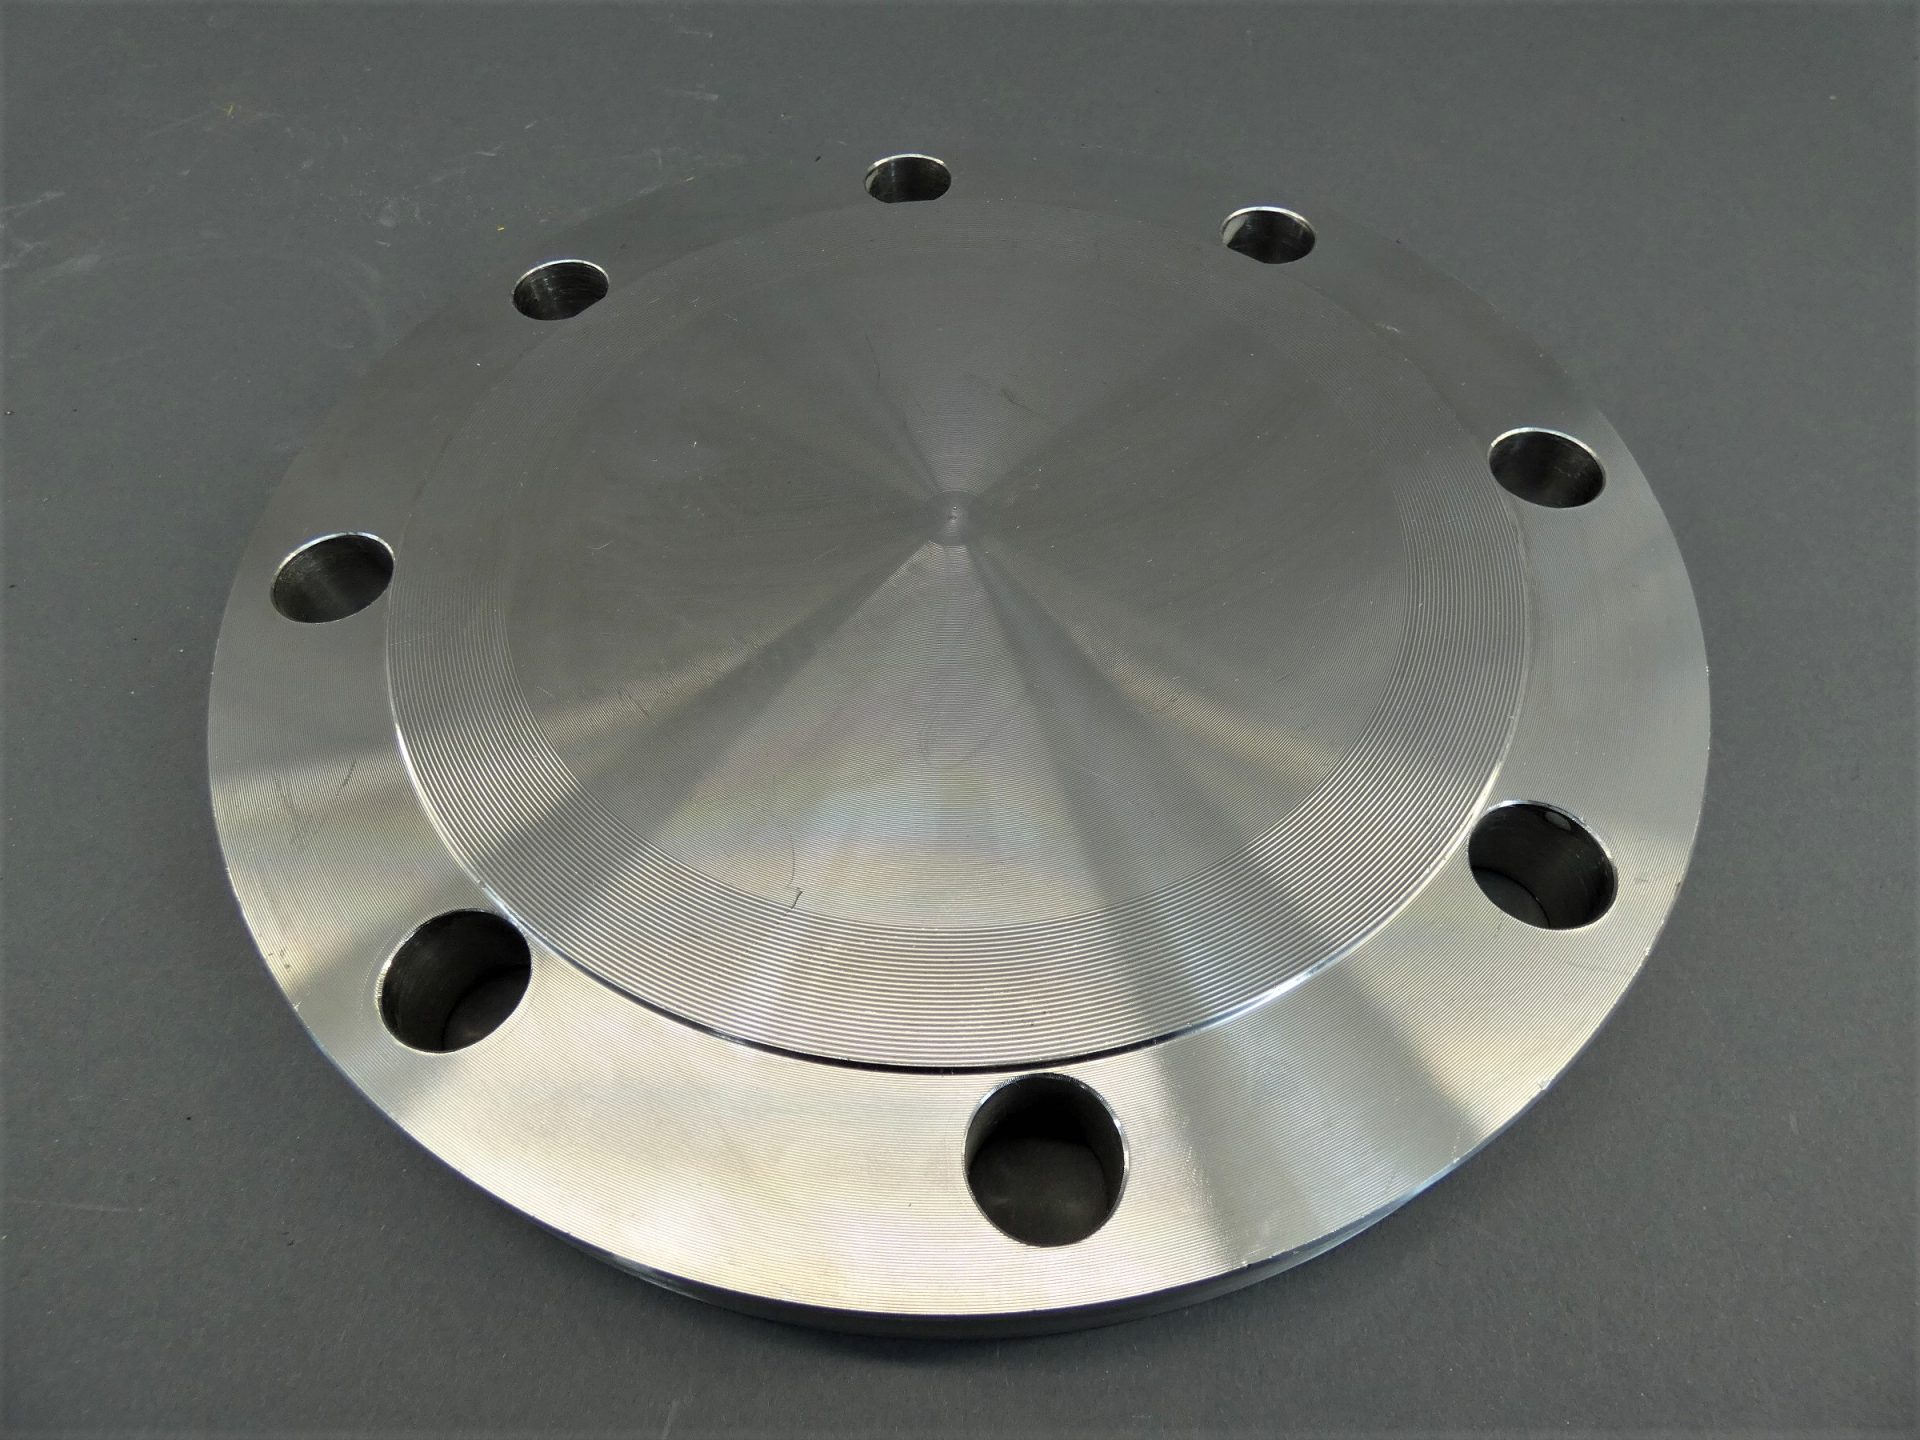 6″ Ansi Blind Flange B165 A182 Raised Face Rf Stainless Steel 150 316316l Ss Gpm Surplus 0100